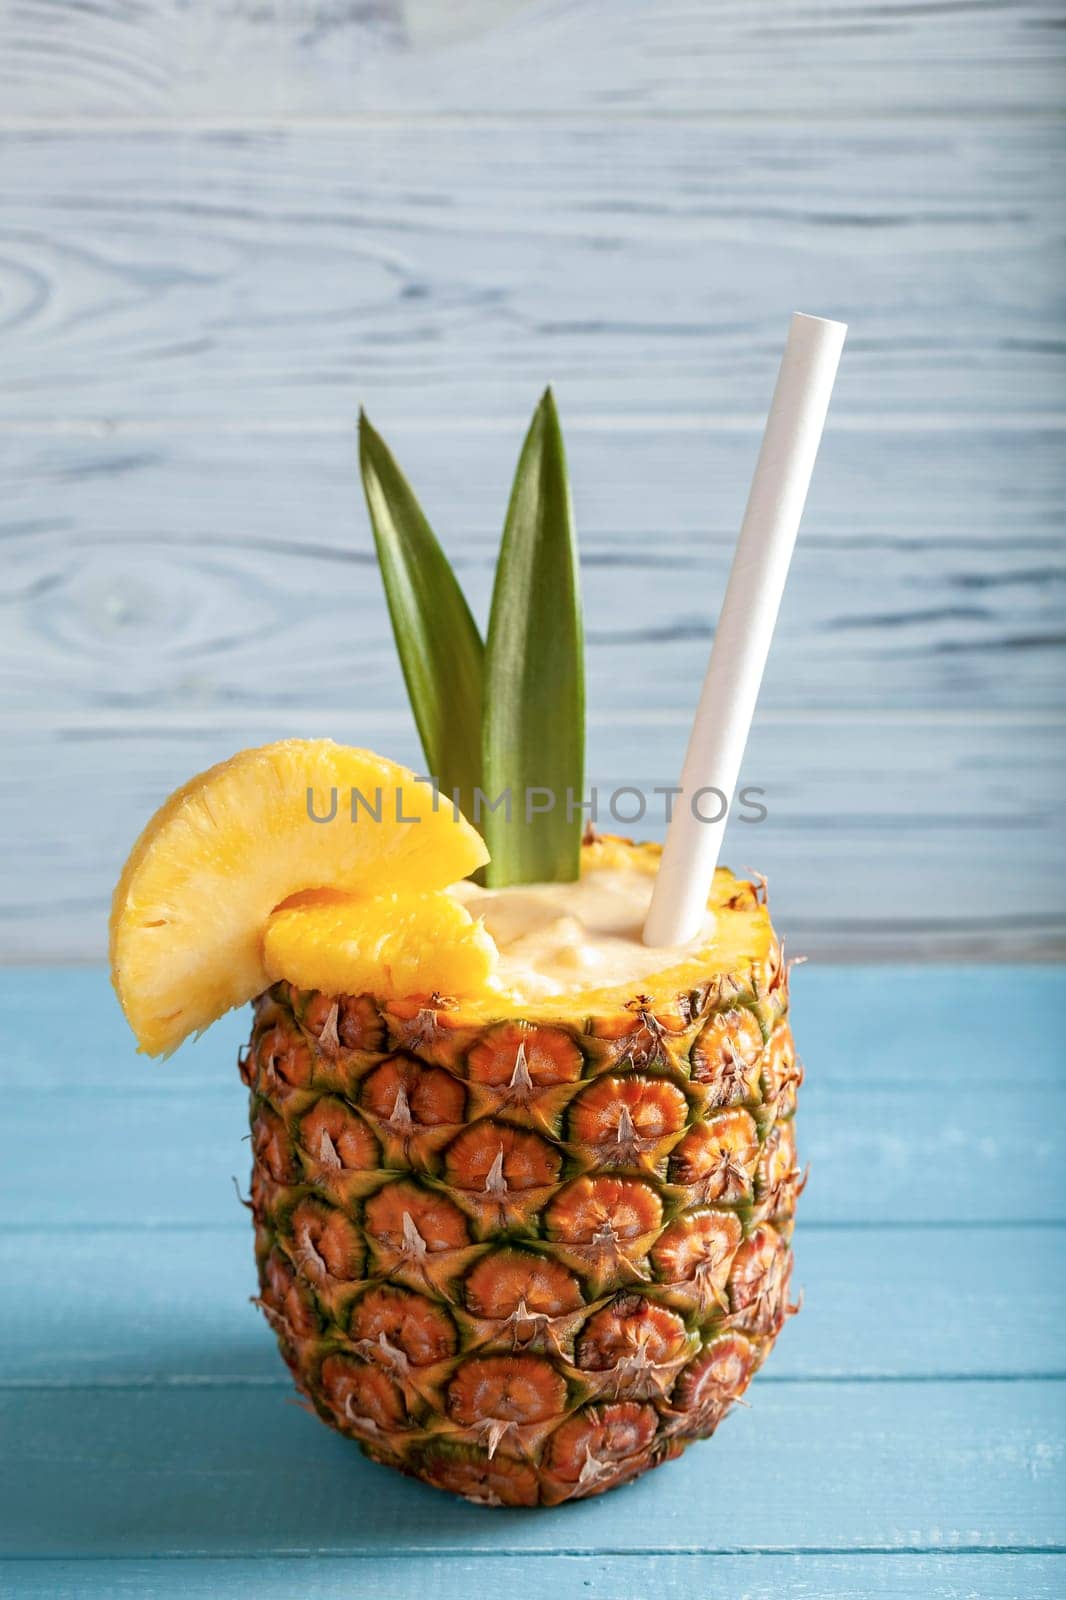 Vertical photo - Pina colada cocktail in pineapple with pineapple slices, straw, two green leaves standing on blue boards